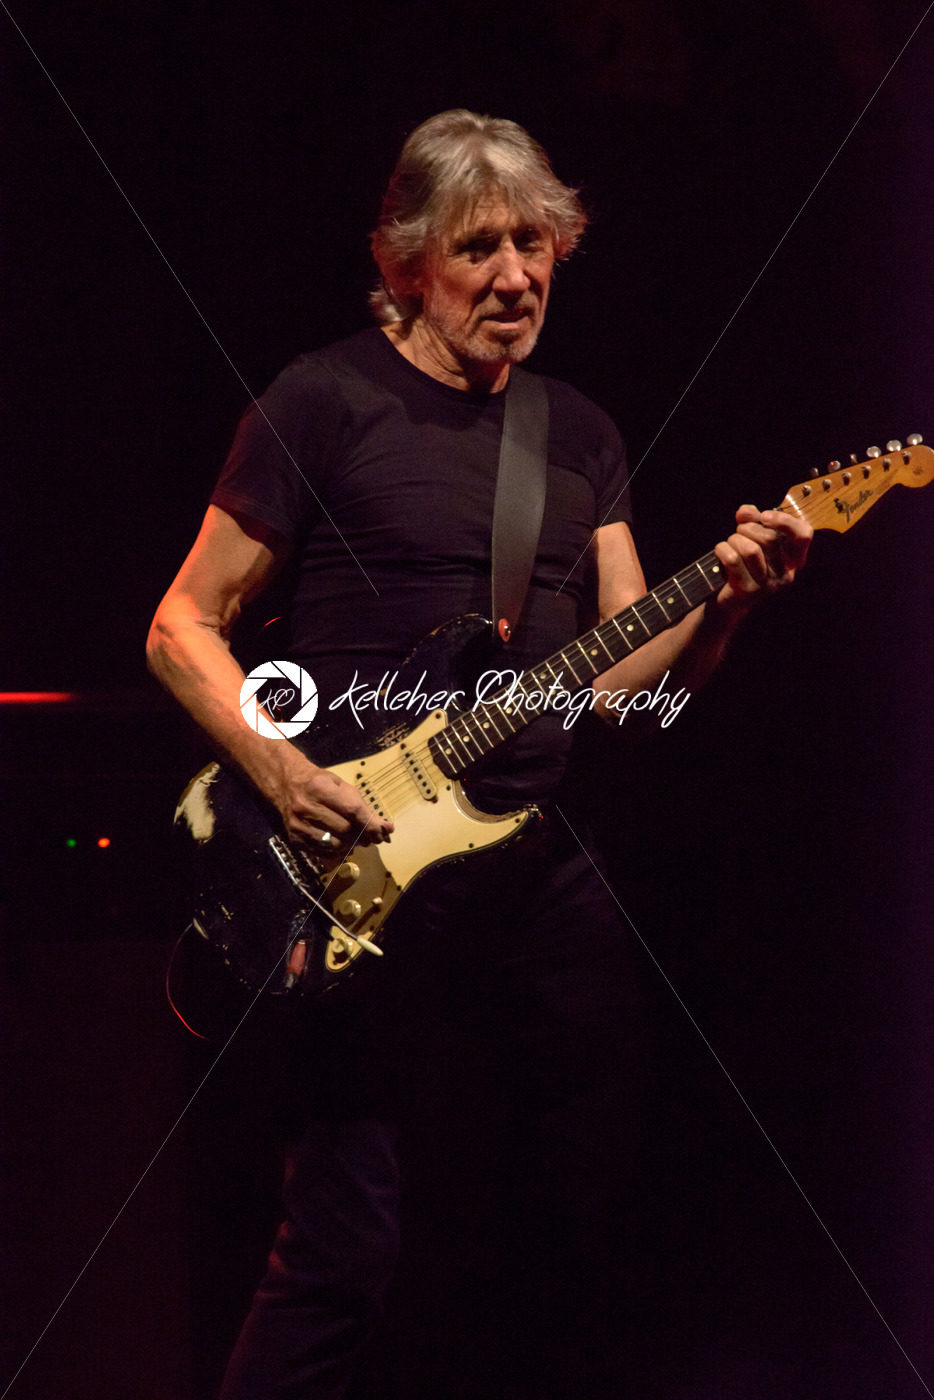 PHILADELPHIA, PA – AUGUST 8: Roger Waters performs in Philadelphia on his Us+Them tour on August 8, 2017 - Kelleher Photography Store